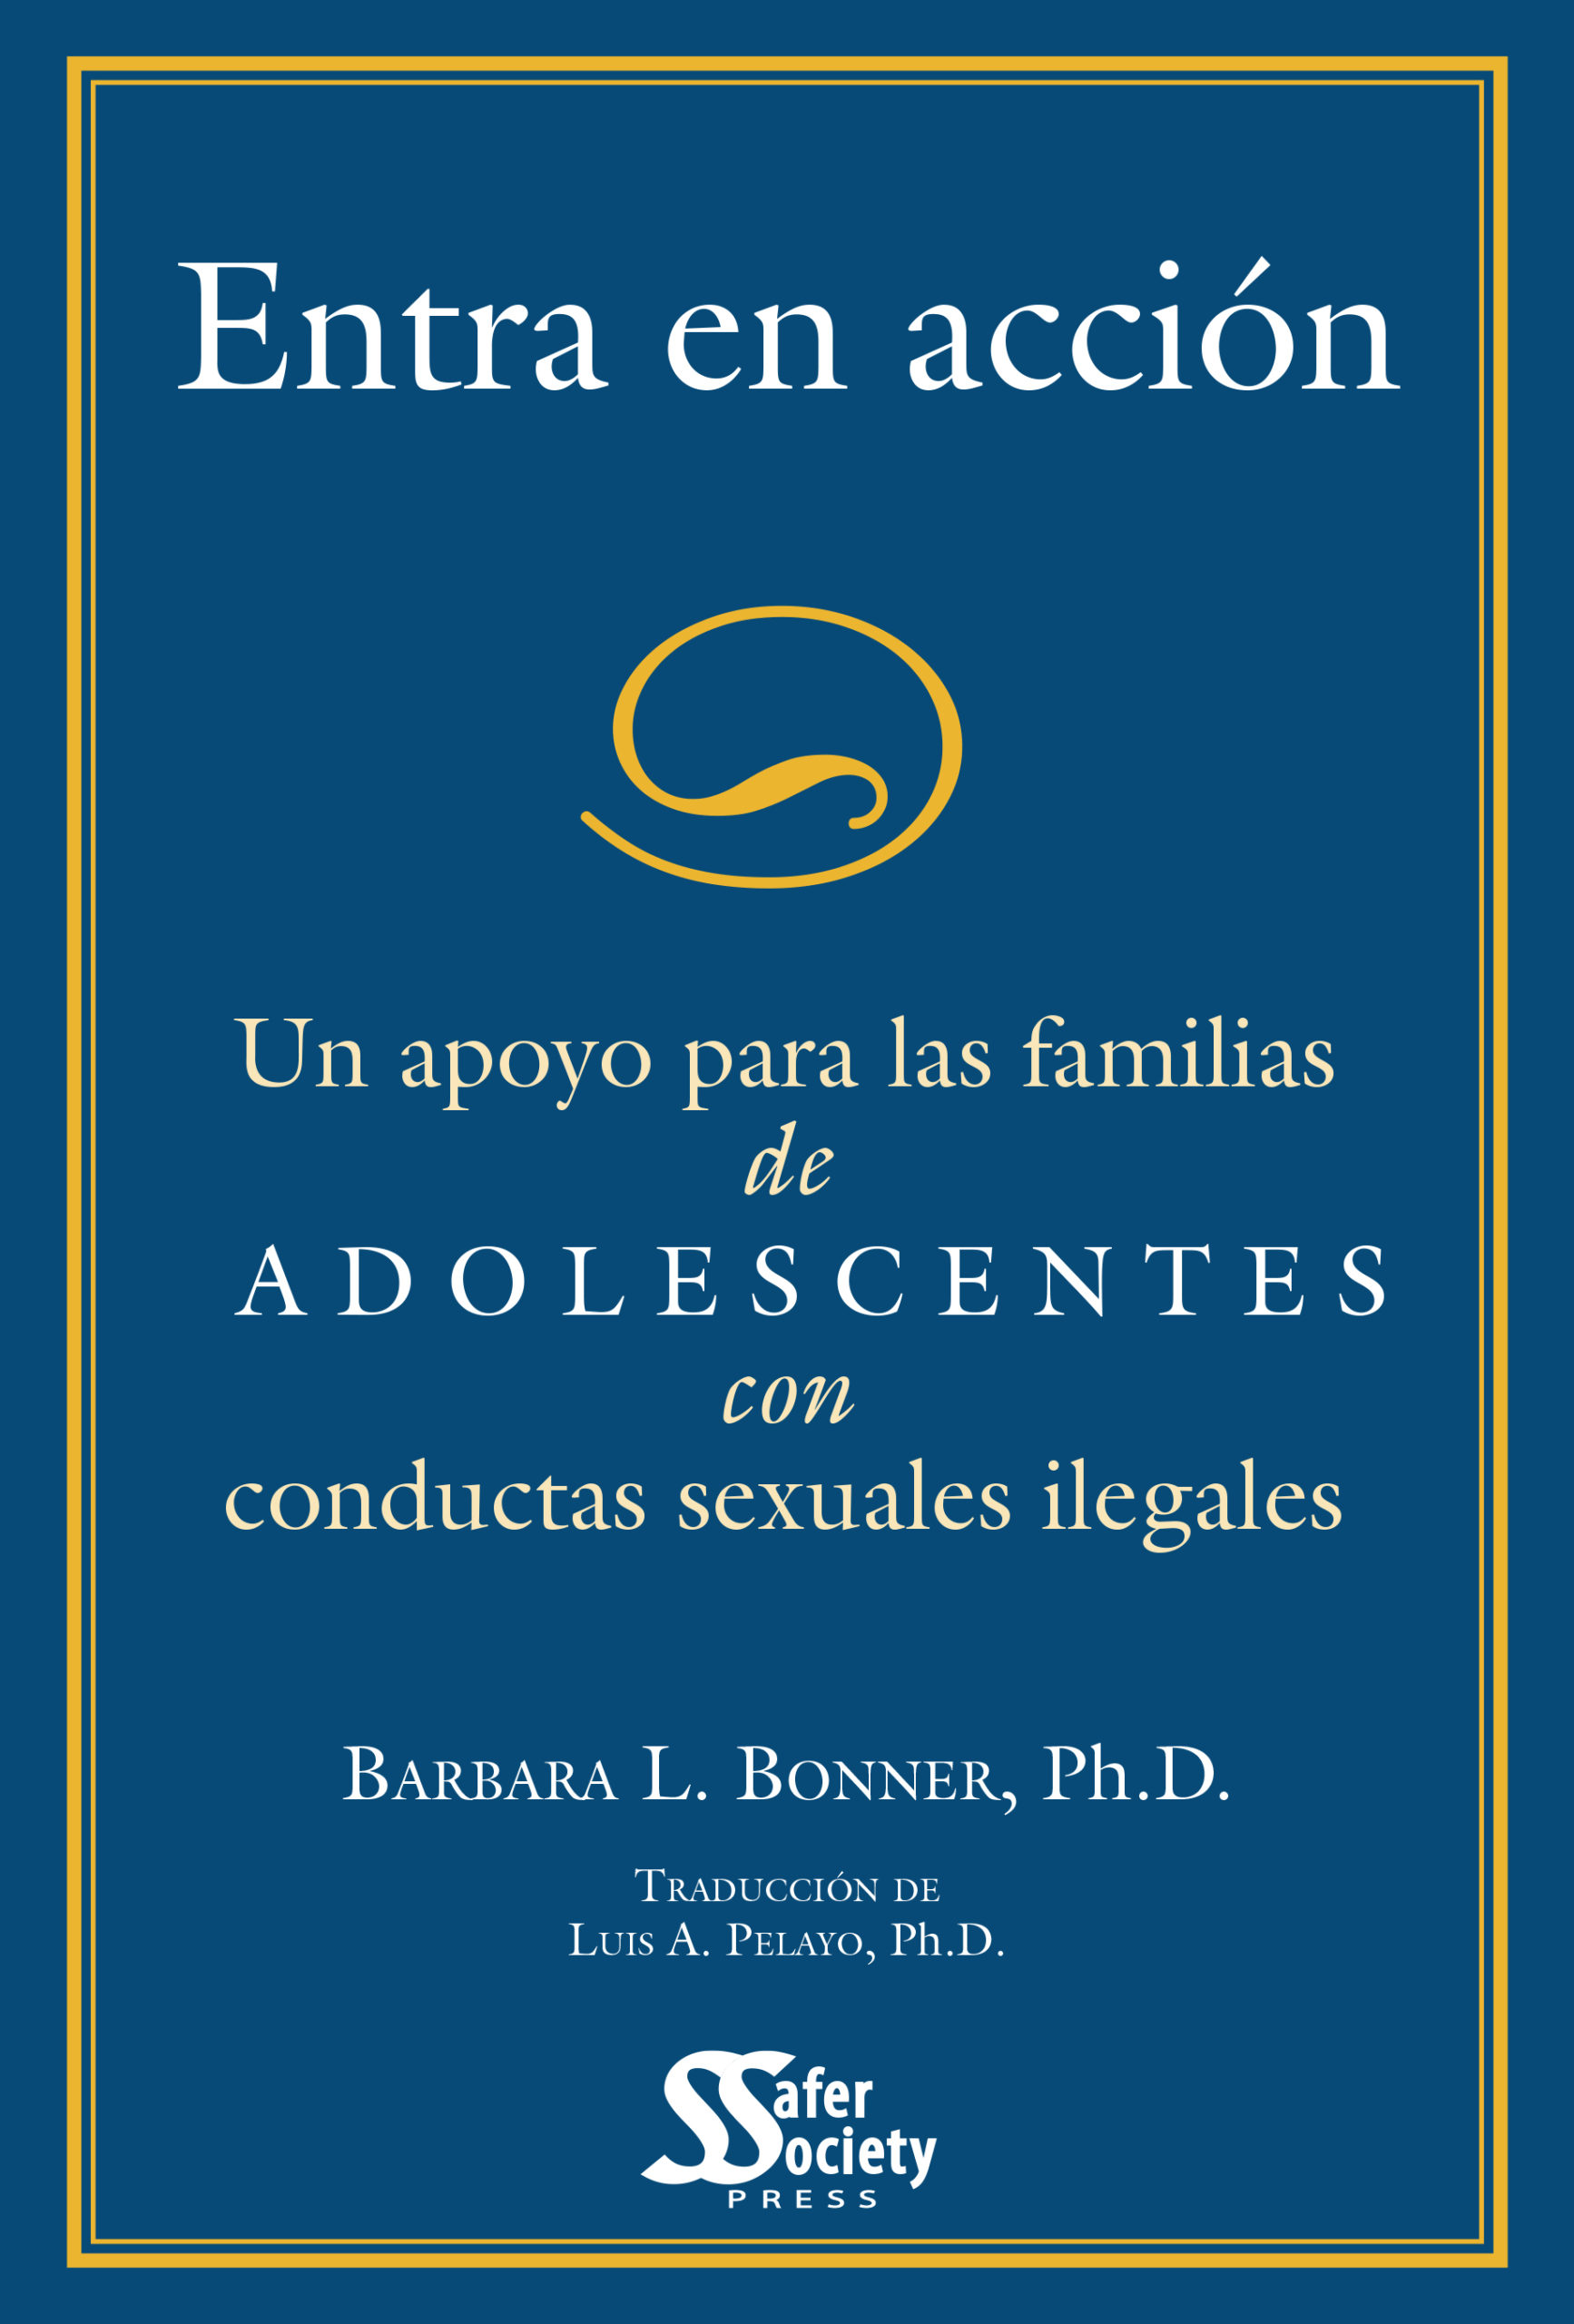 Spanish Edition: Taking Action for Adolescents